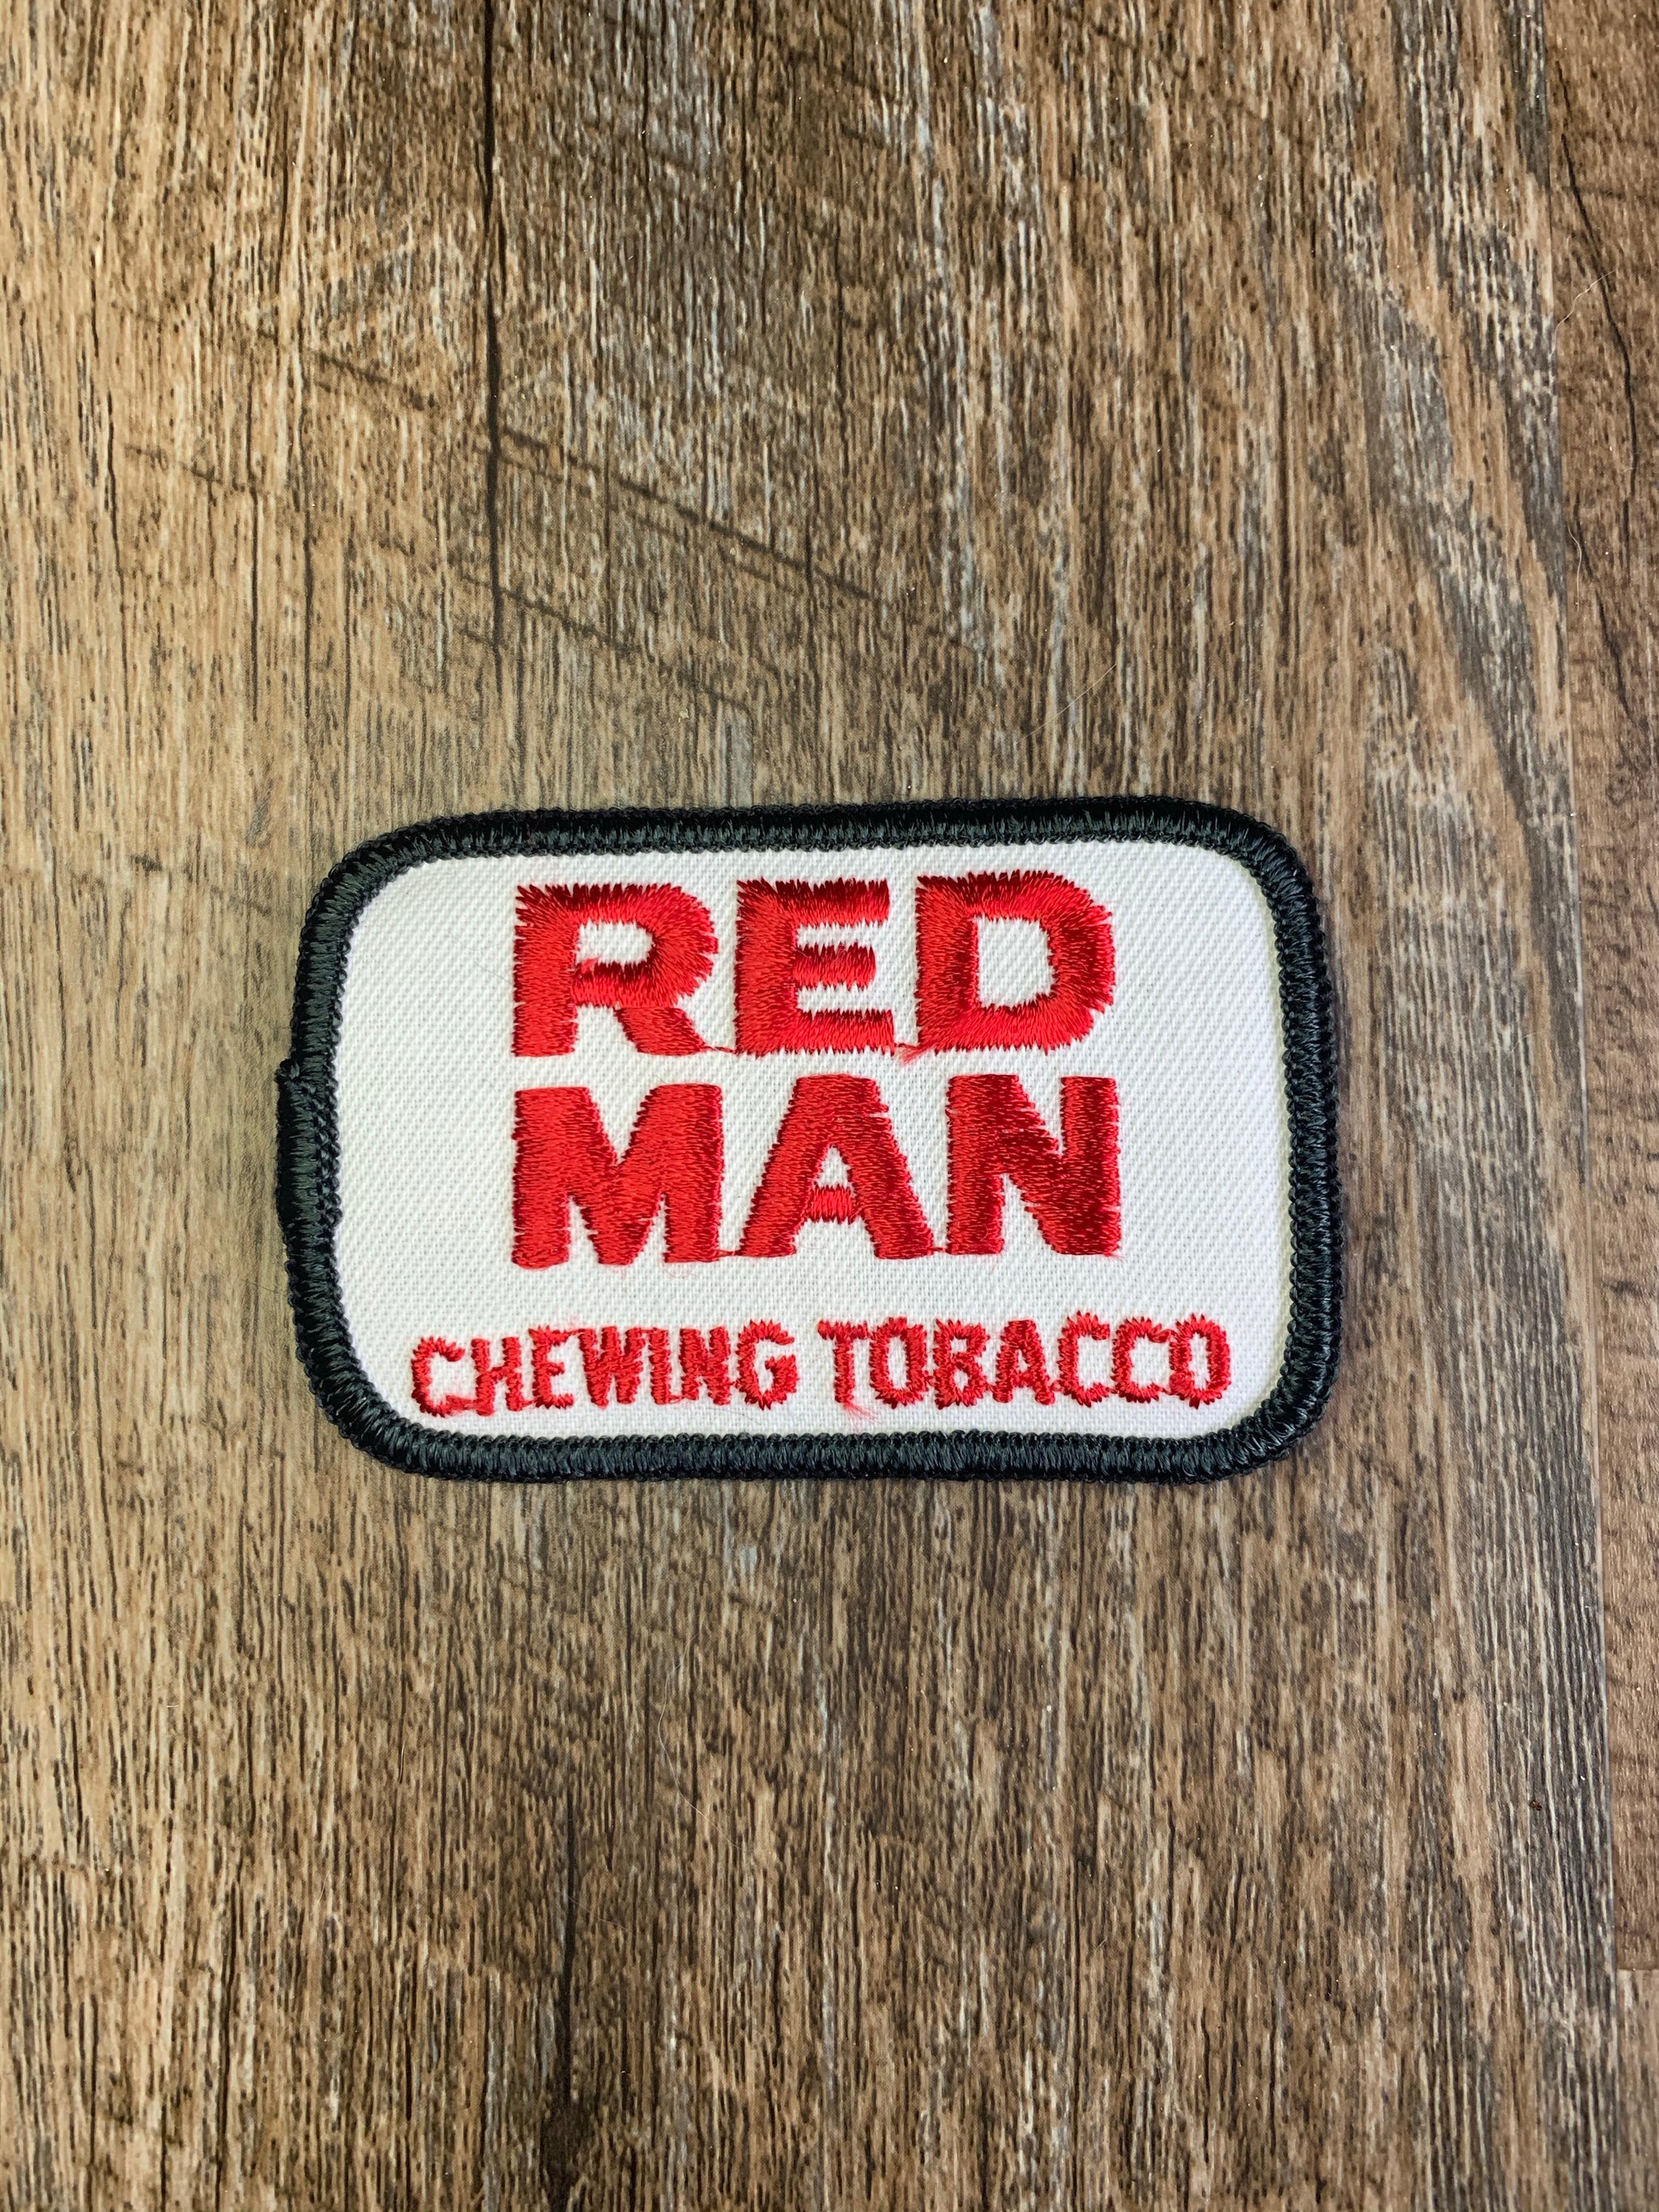 red man chewing tobacco logo